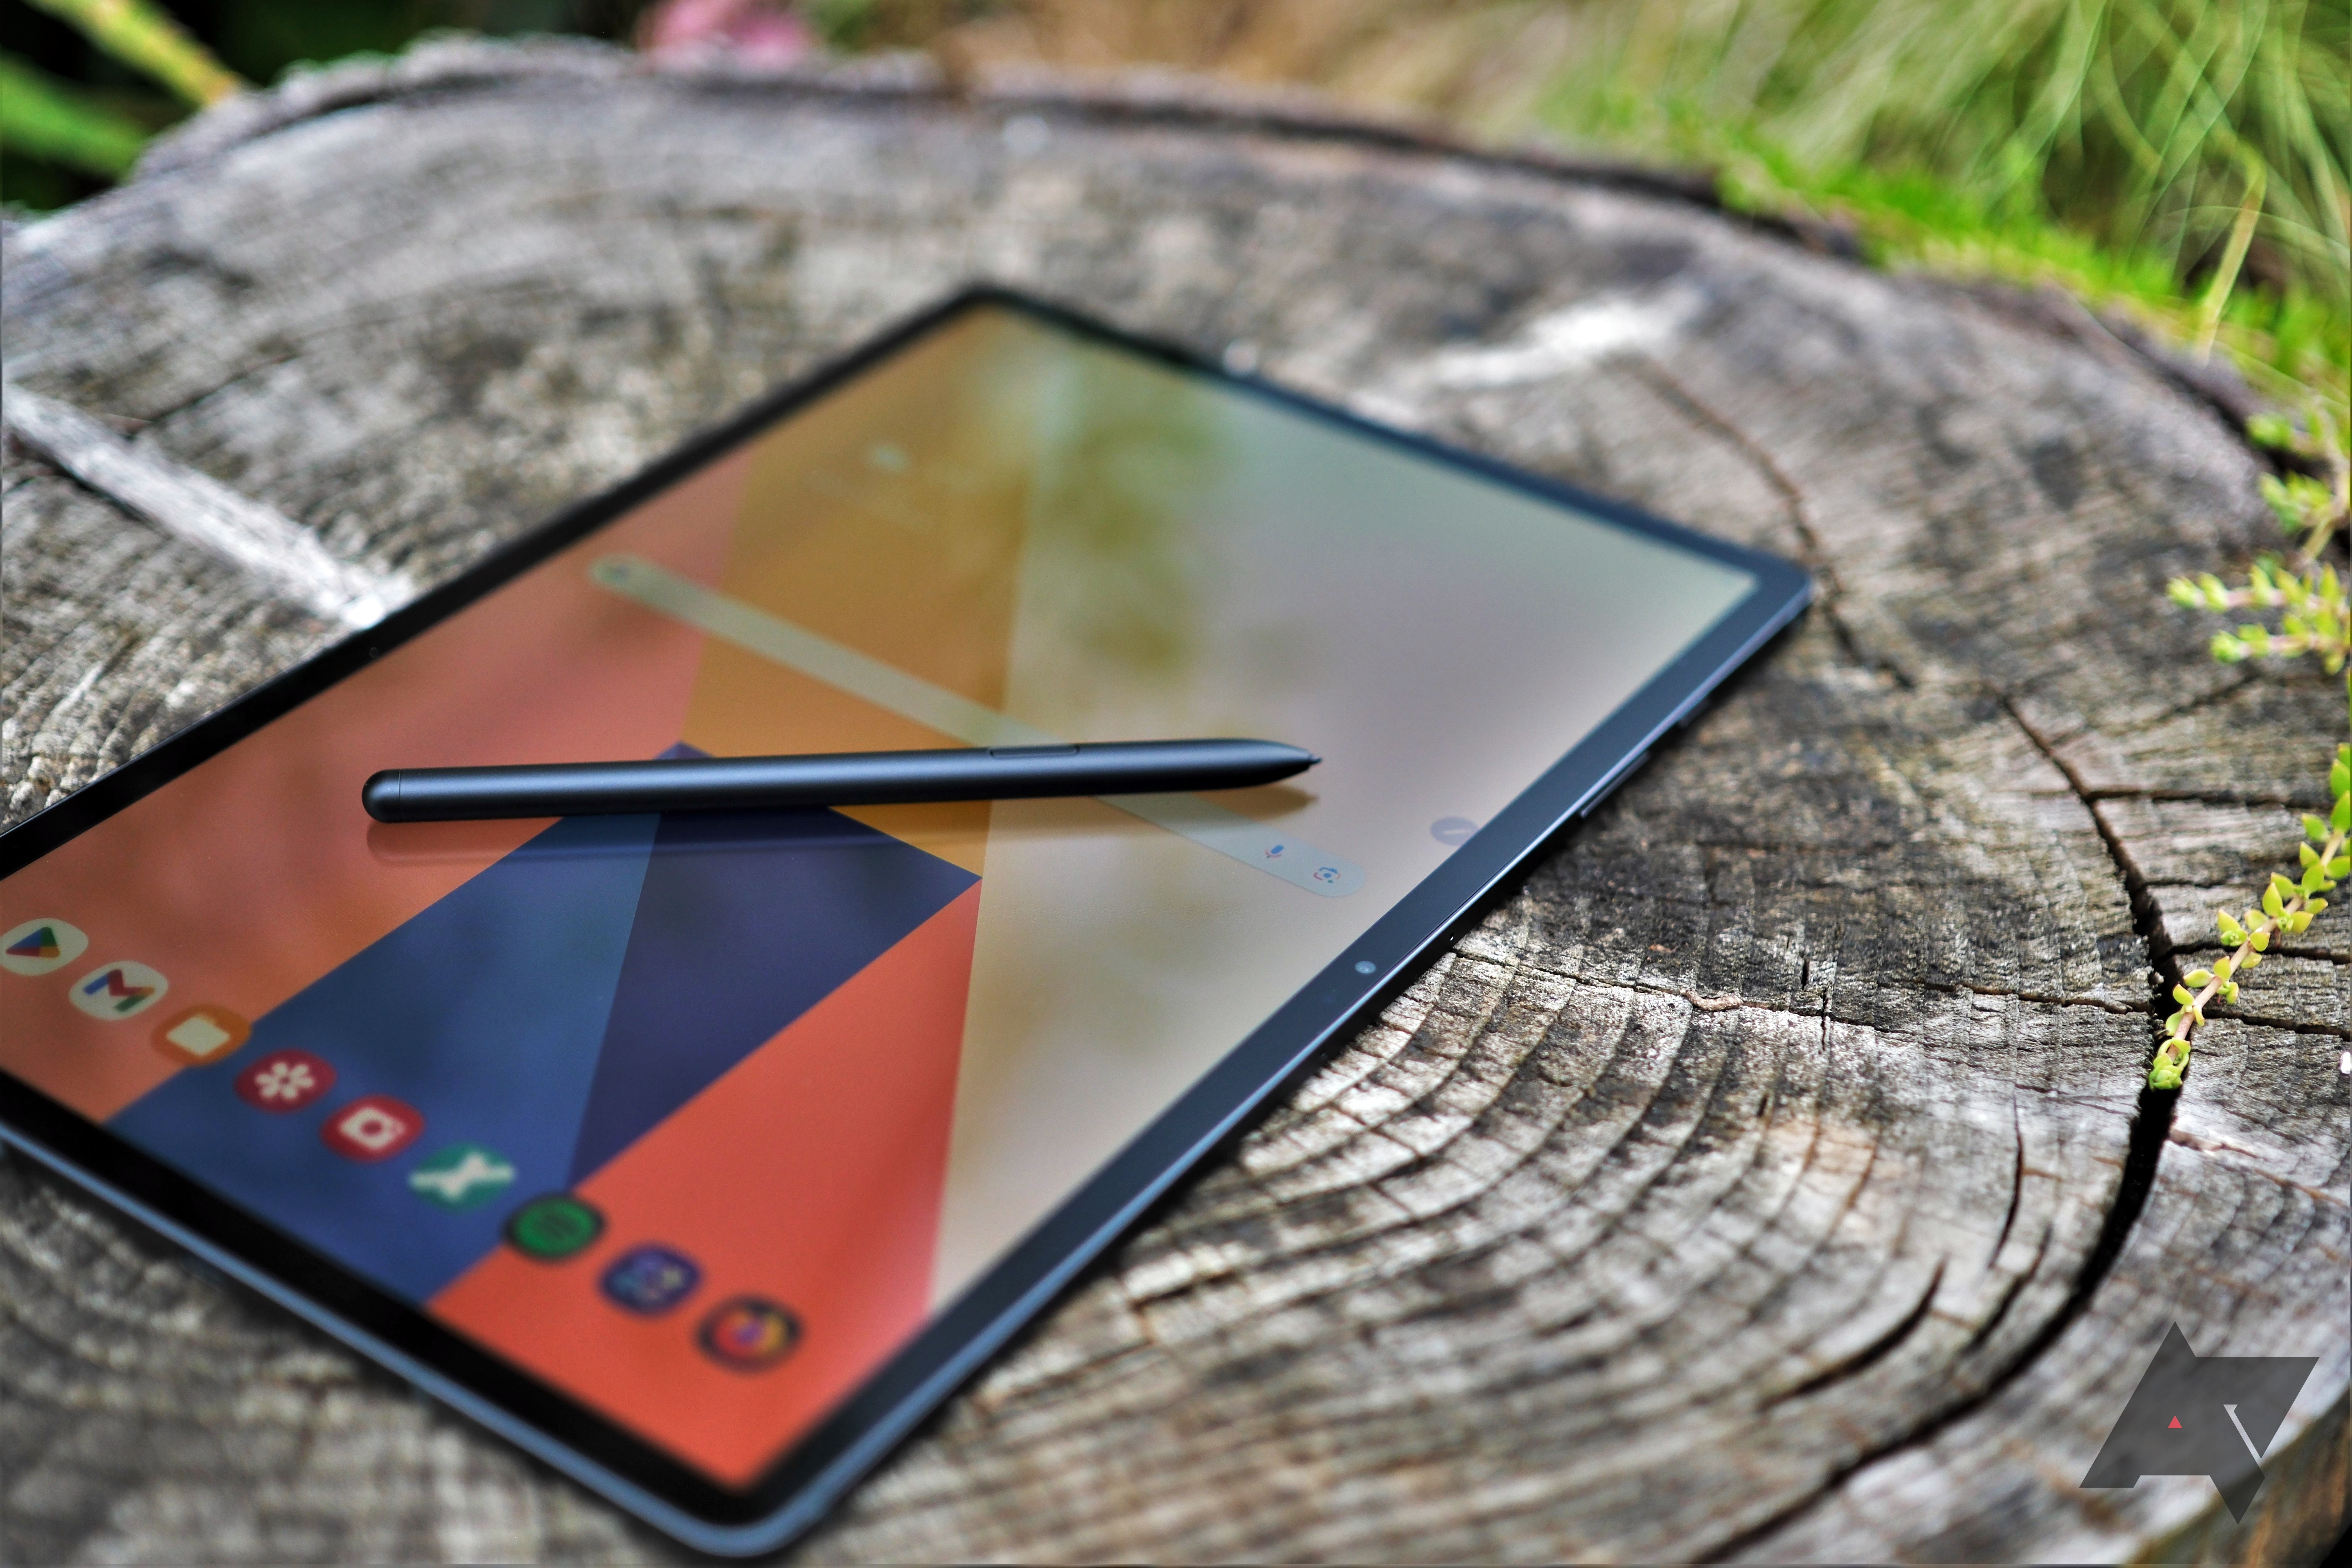 The best Android tablets of 2024: Expert tested and reviewed